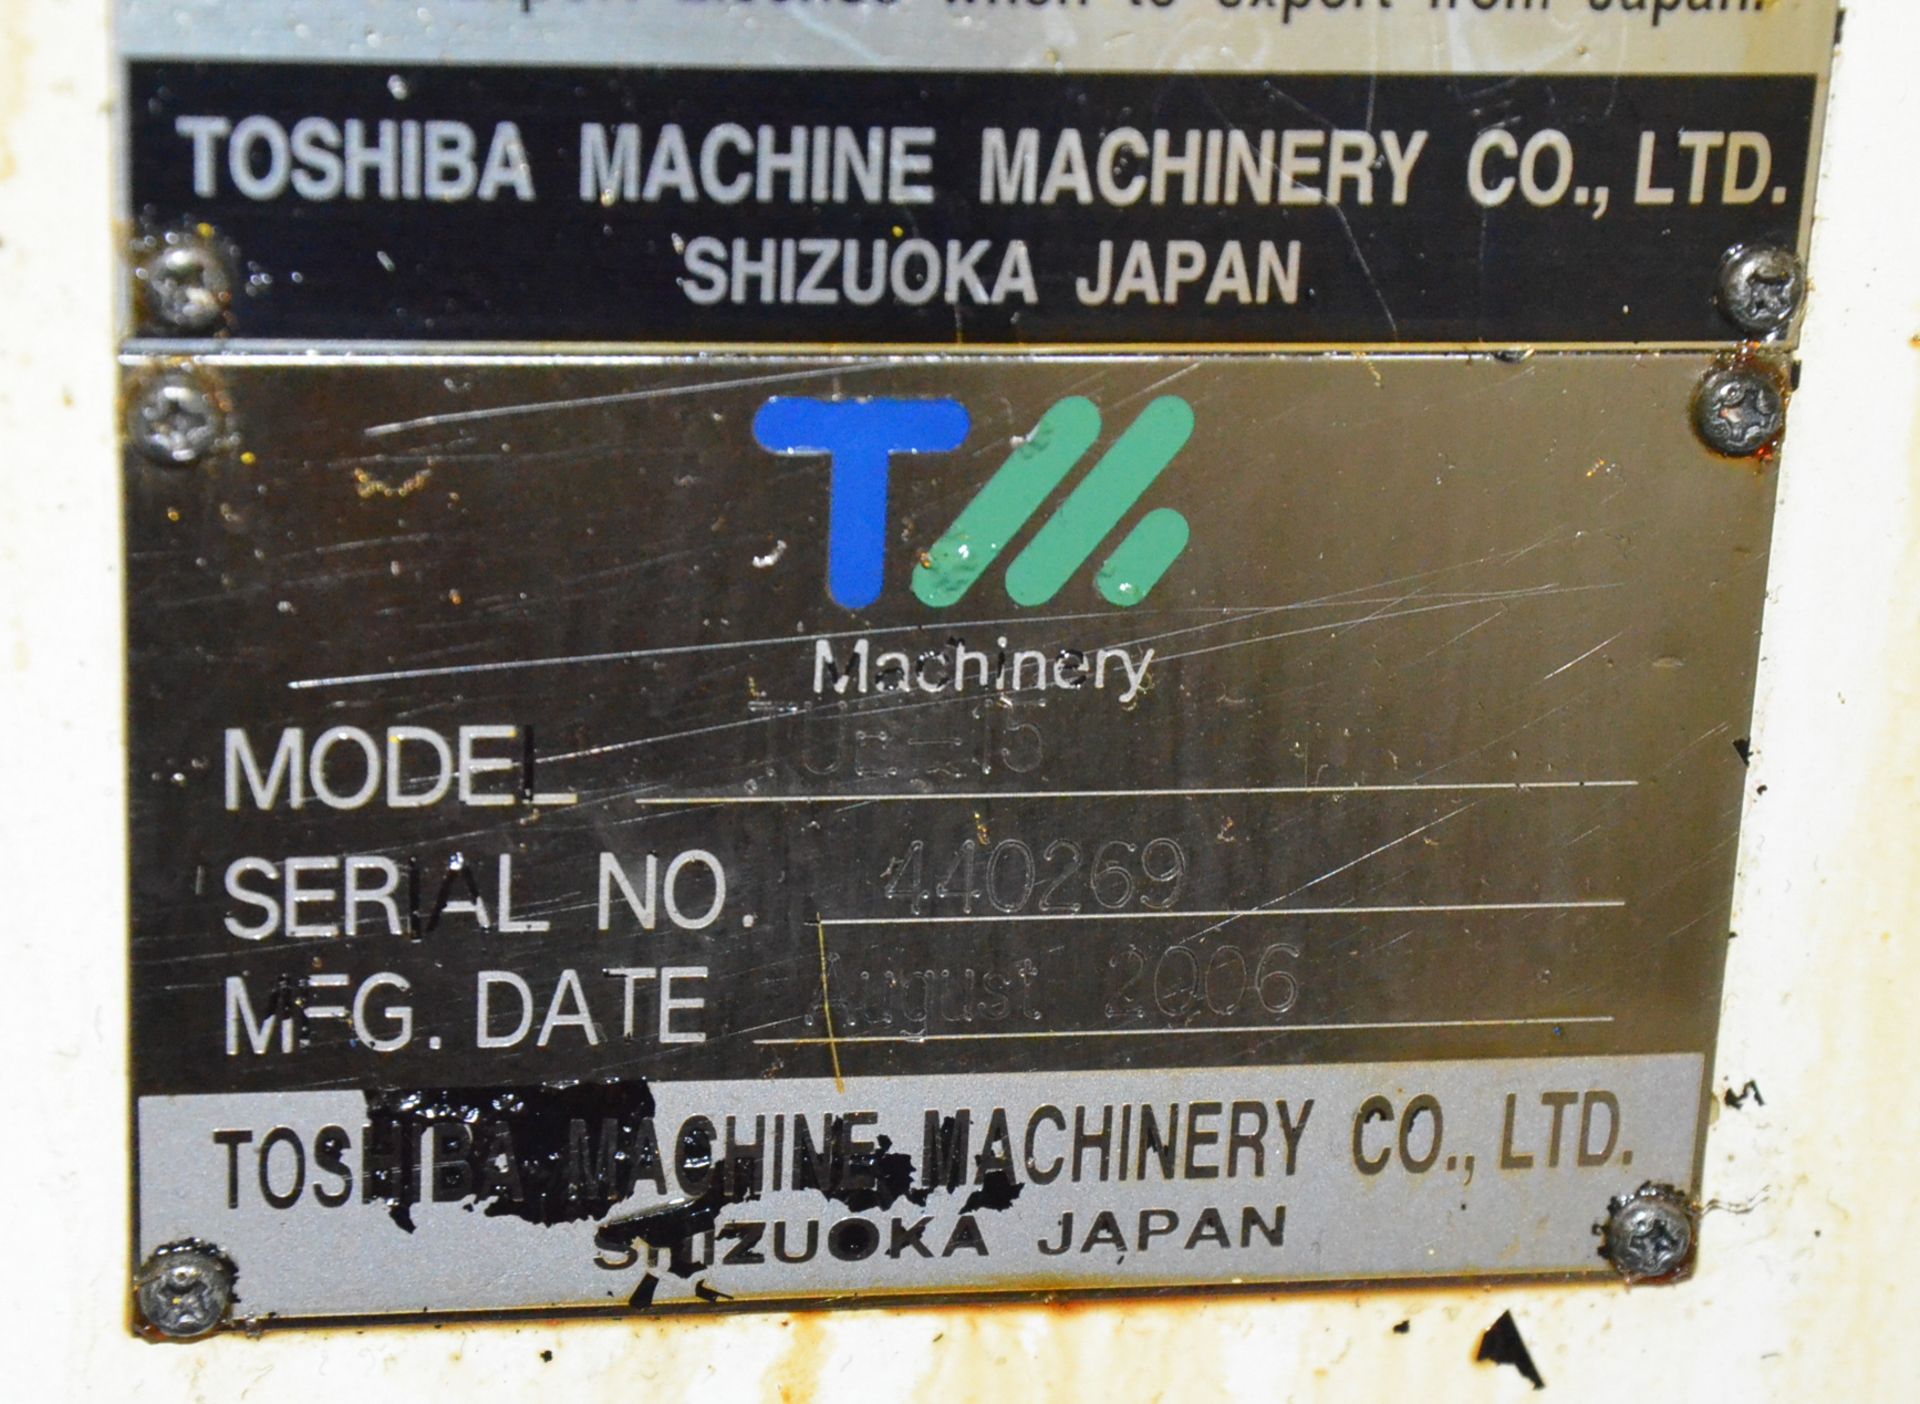 TOSHIBA SHIBAURA (08-2006) TUE-15 CNC VERTICAL BORING AND LIVE MILLING CENTER WITH FANUC SERIES 18-T - Image 13 of 19